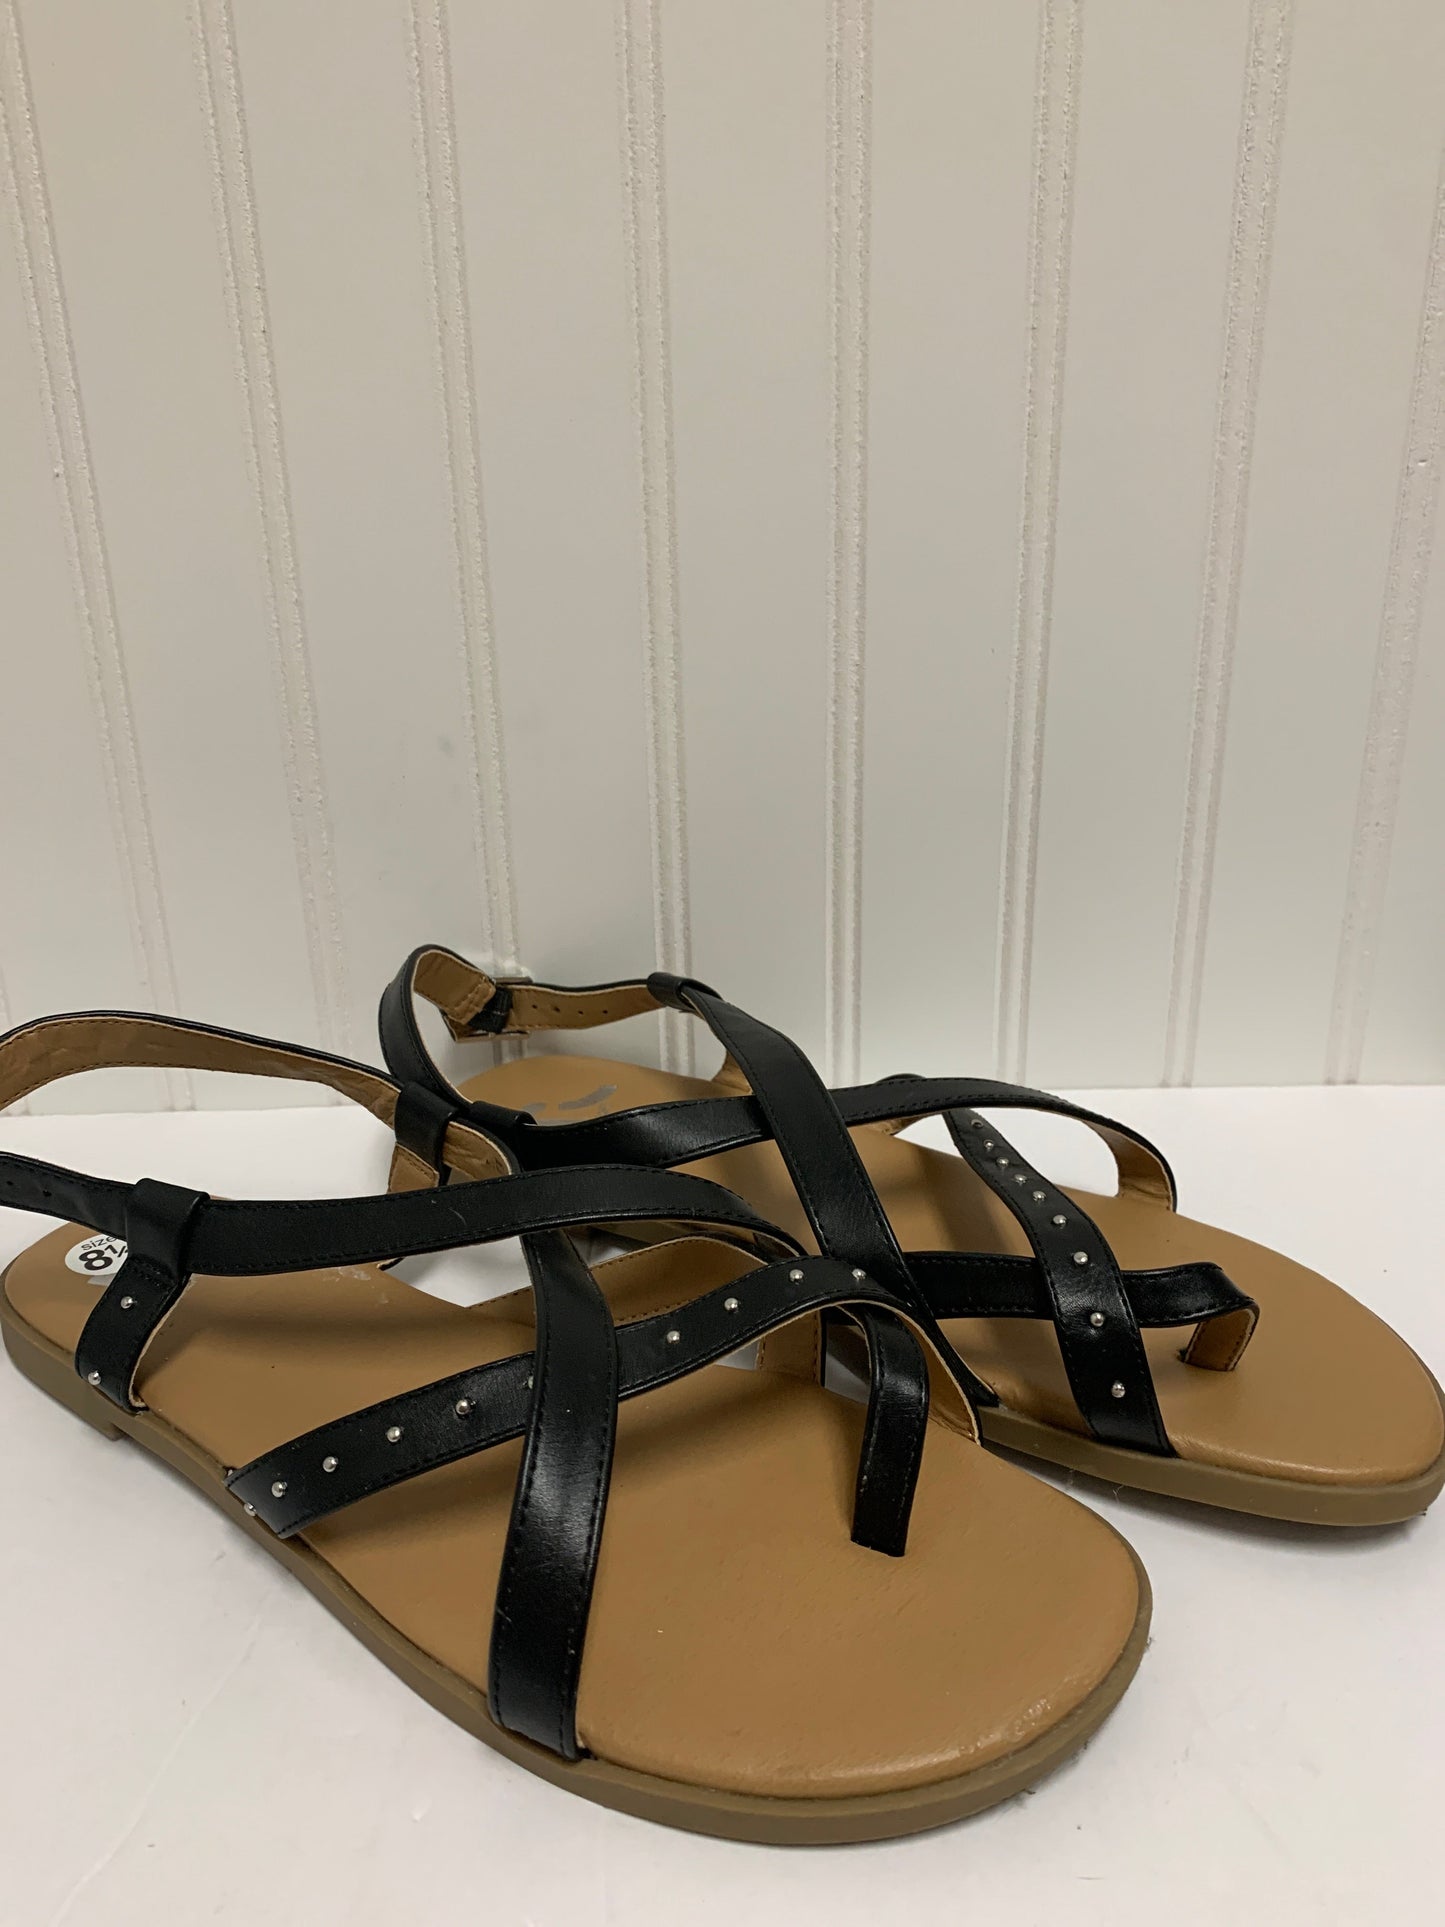 Sandals Flats By Report  Size: 9.5